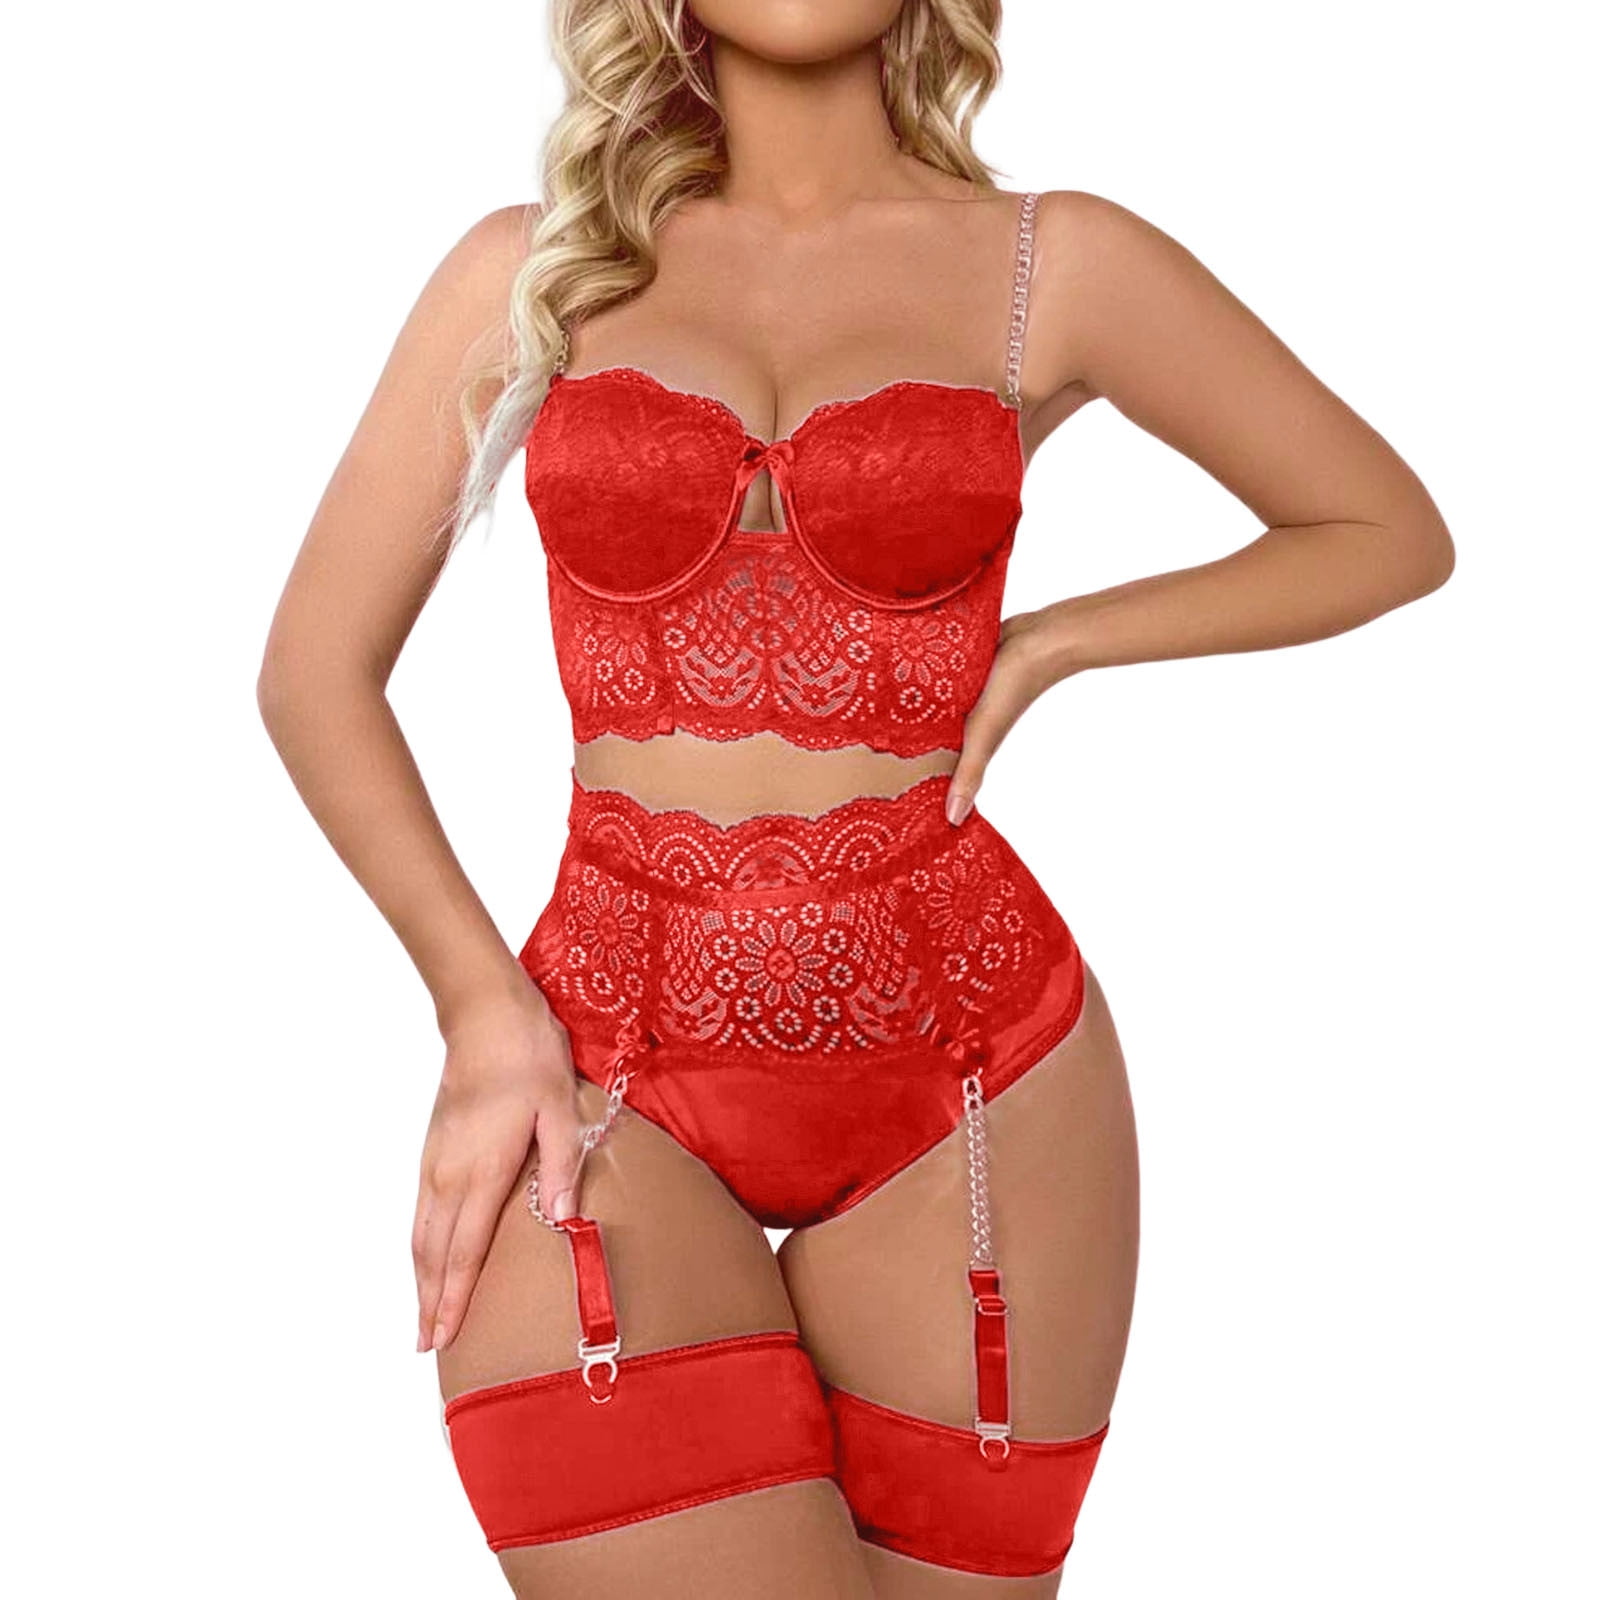 LBECLEY 1/4 Cup Bra Lingerie Plus Size Lace Heart Embroidered Fashion  Lingerie Hollow 3 Piece Garther Lingerie Set for Mature Women Outfits for  Adults